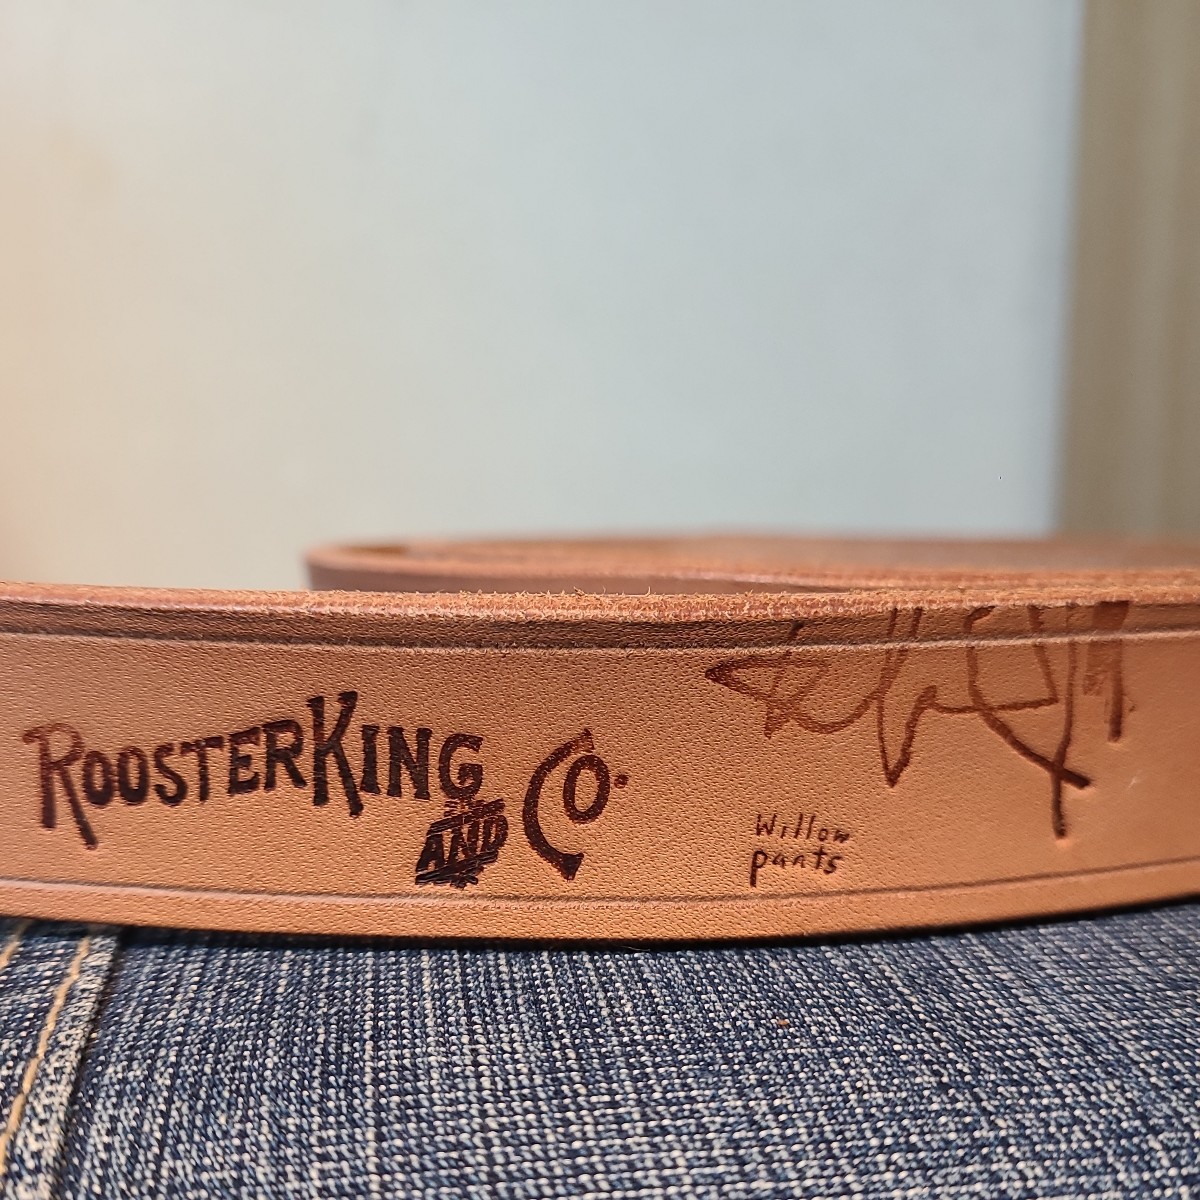 Willow Pants × ROOSTERKING&Co. BYE BYE Leather Belt size FREE 《ウィローパンツ × ルースターキング》 レザー ベルト NATURAL _画像5